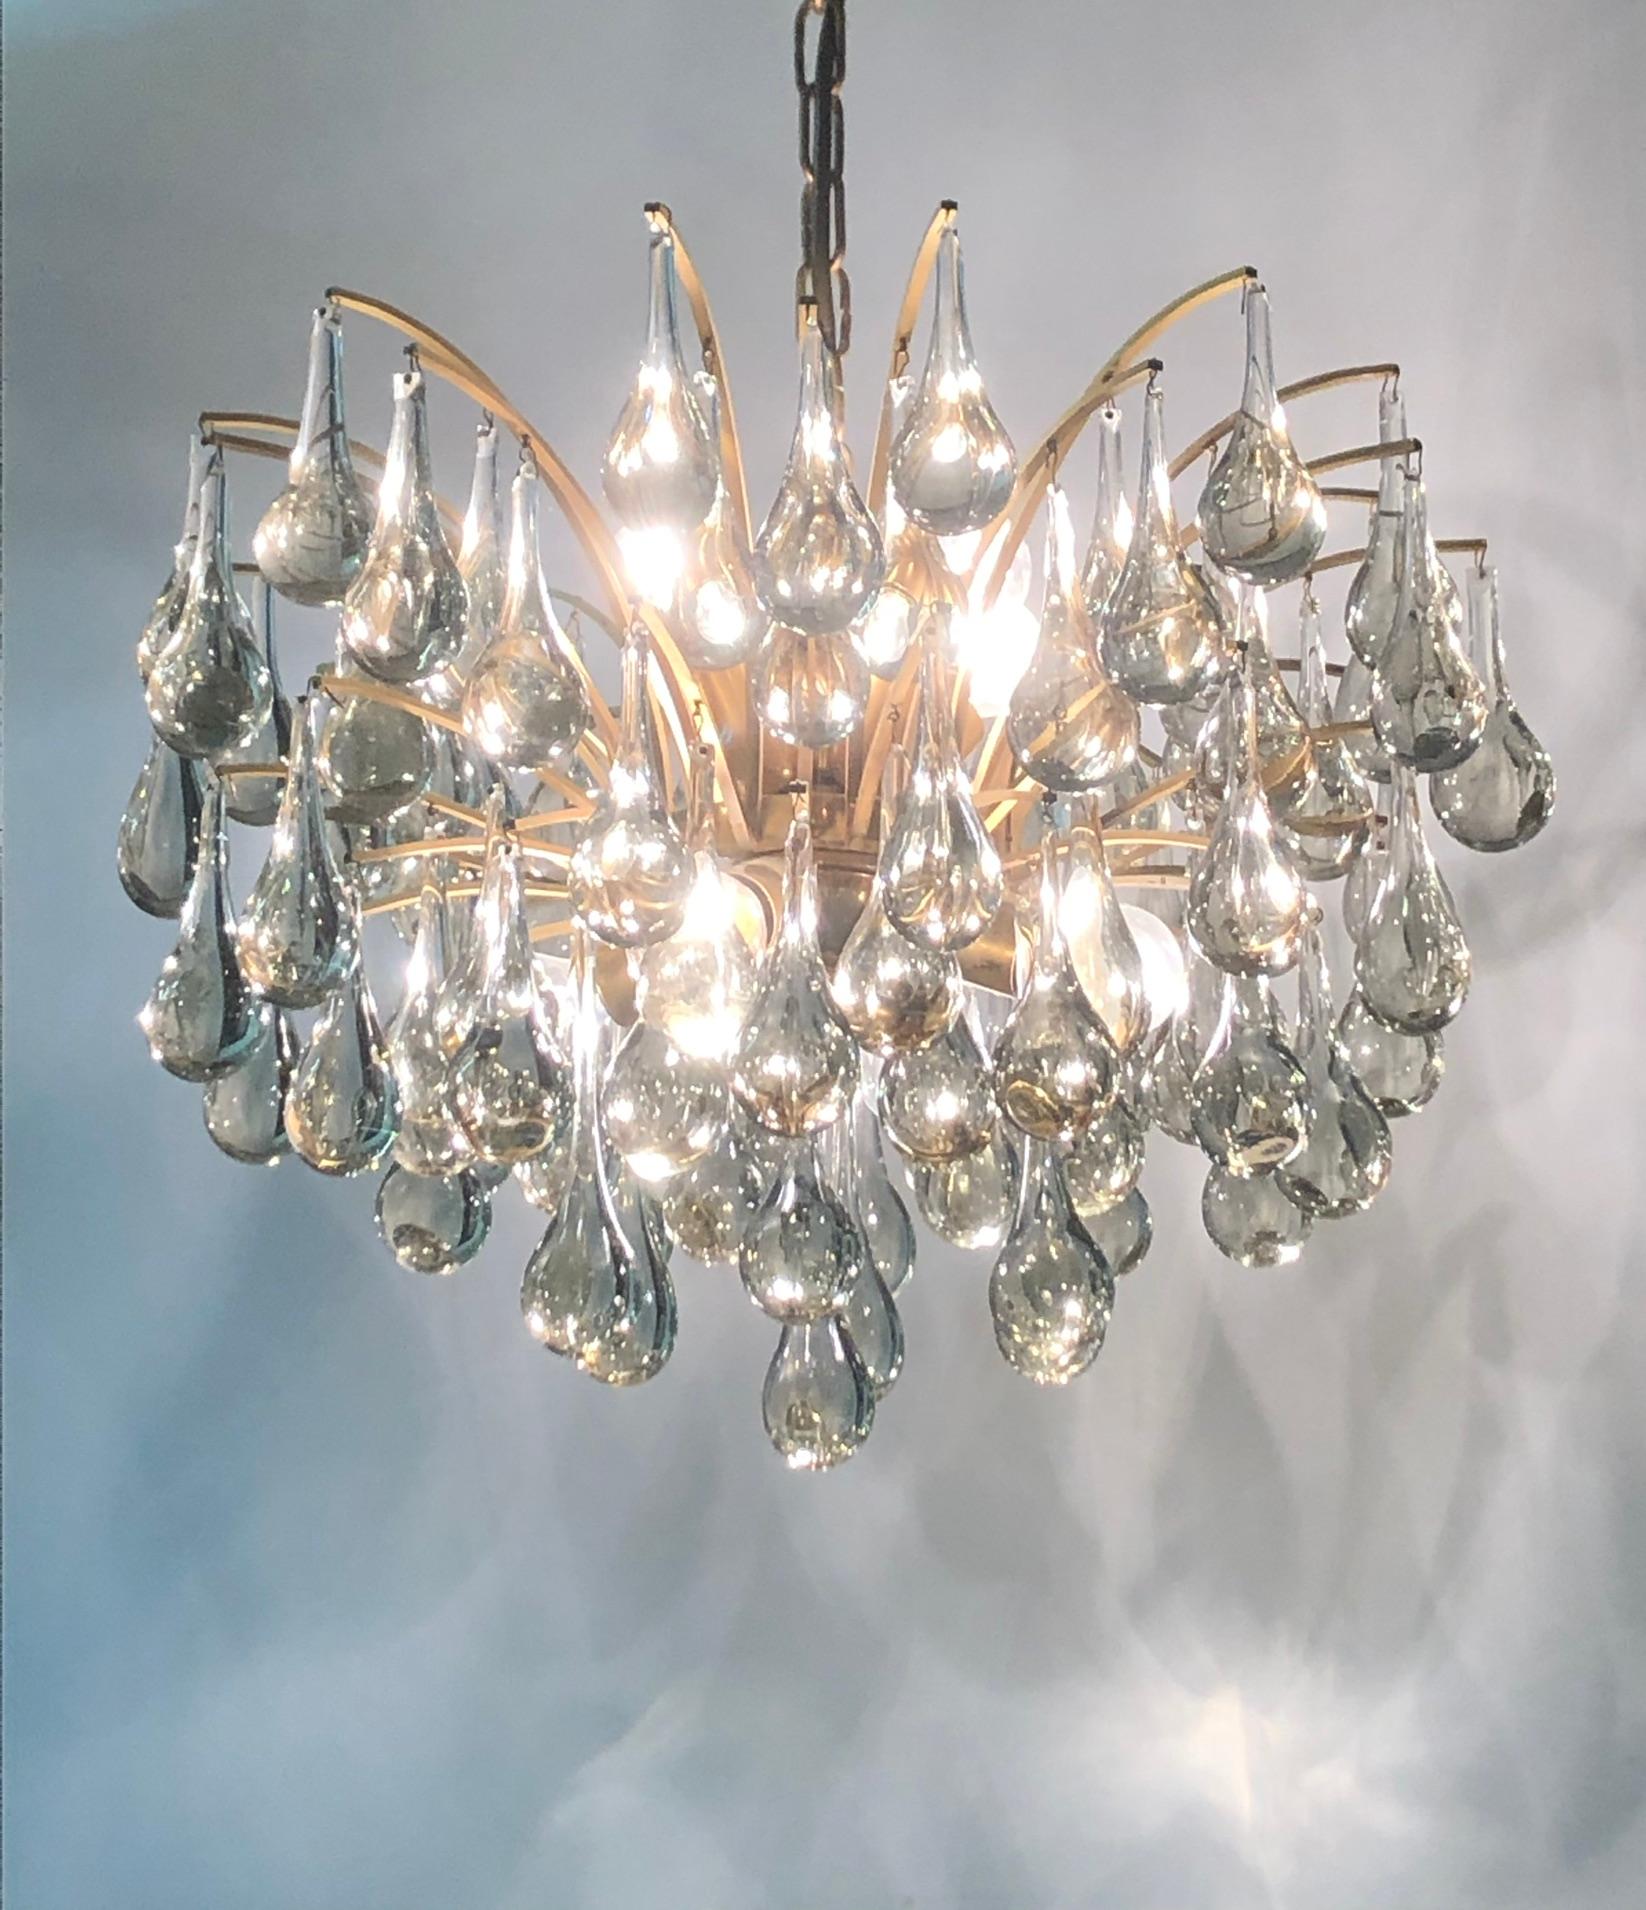 Hollywood Regency Large Murano Glass and Brass Tear Drop Chandelier by E. Palme, circa 1970s For Sale